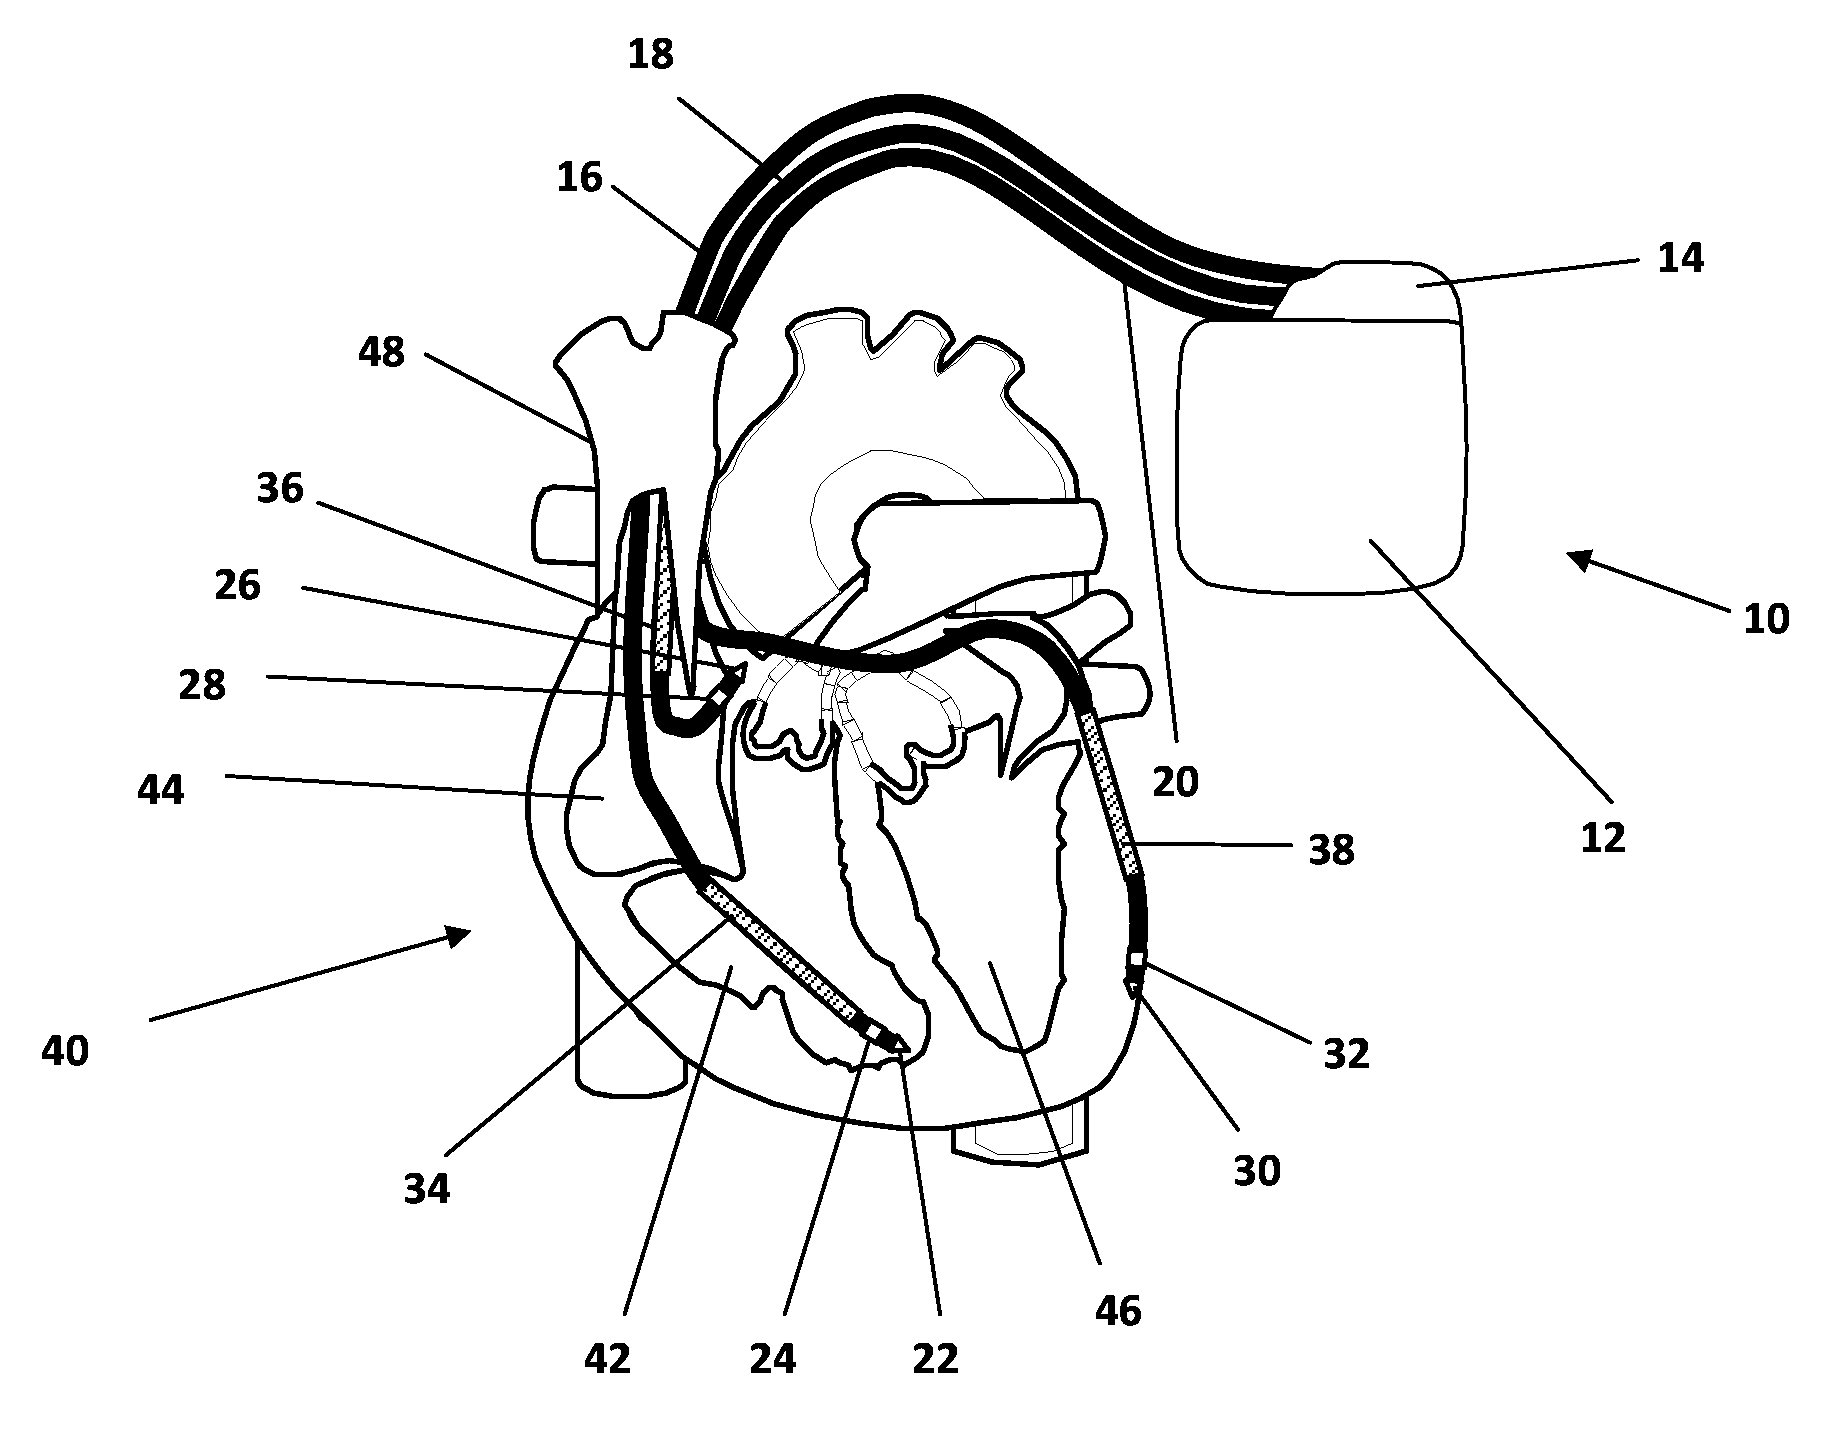 Implantable heart stimulator and method for trending analysis of ventricular activation time